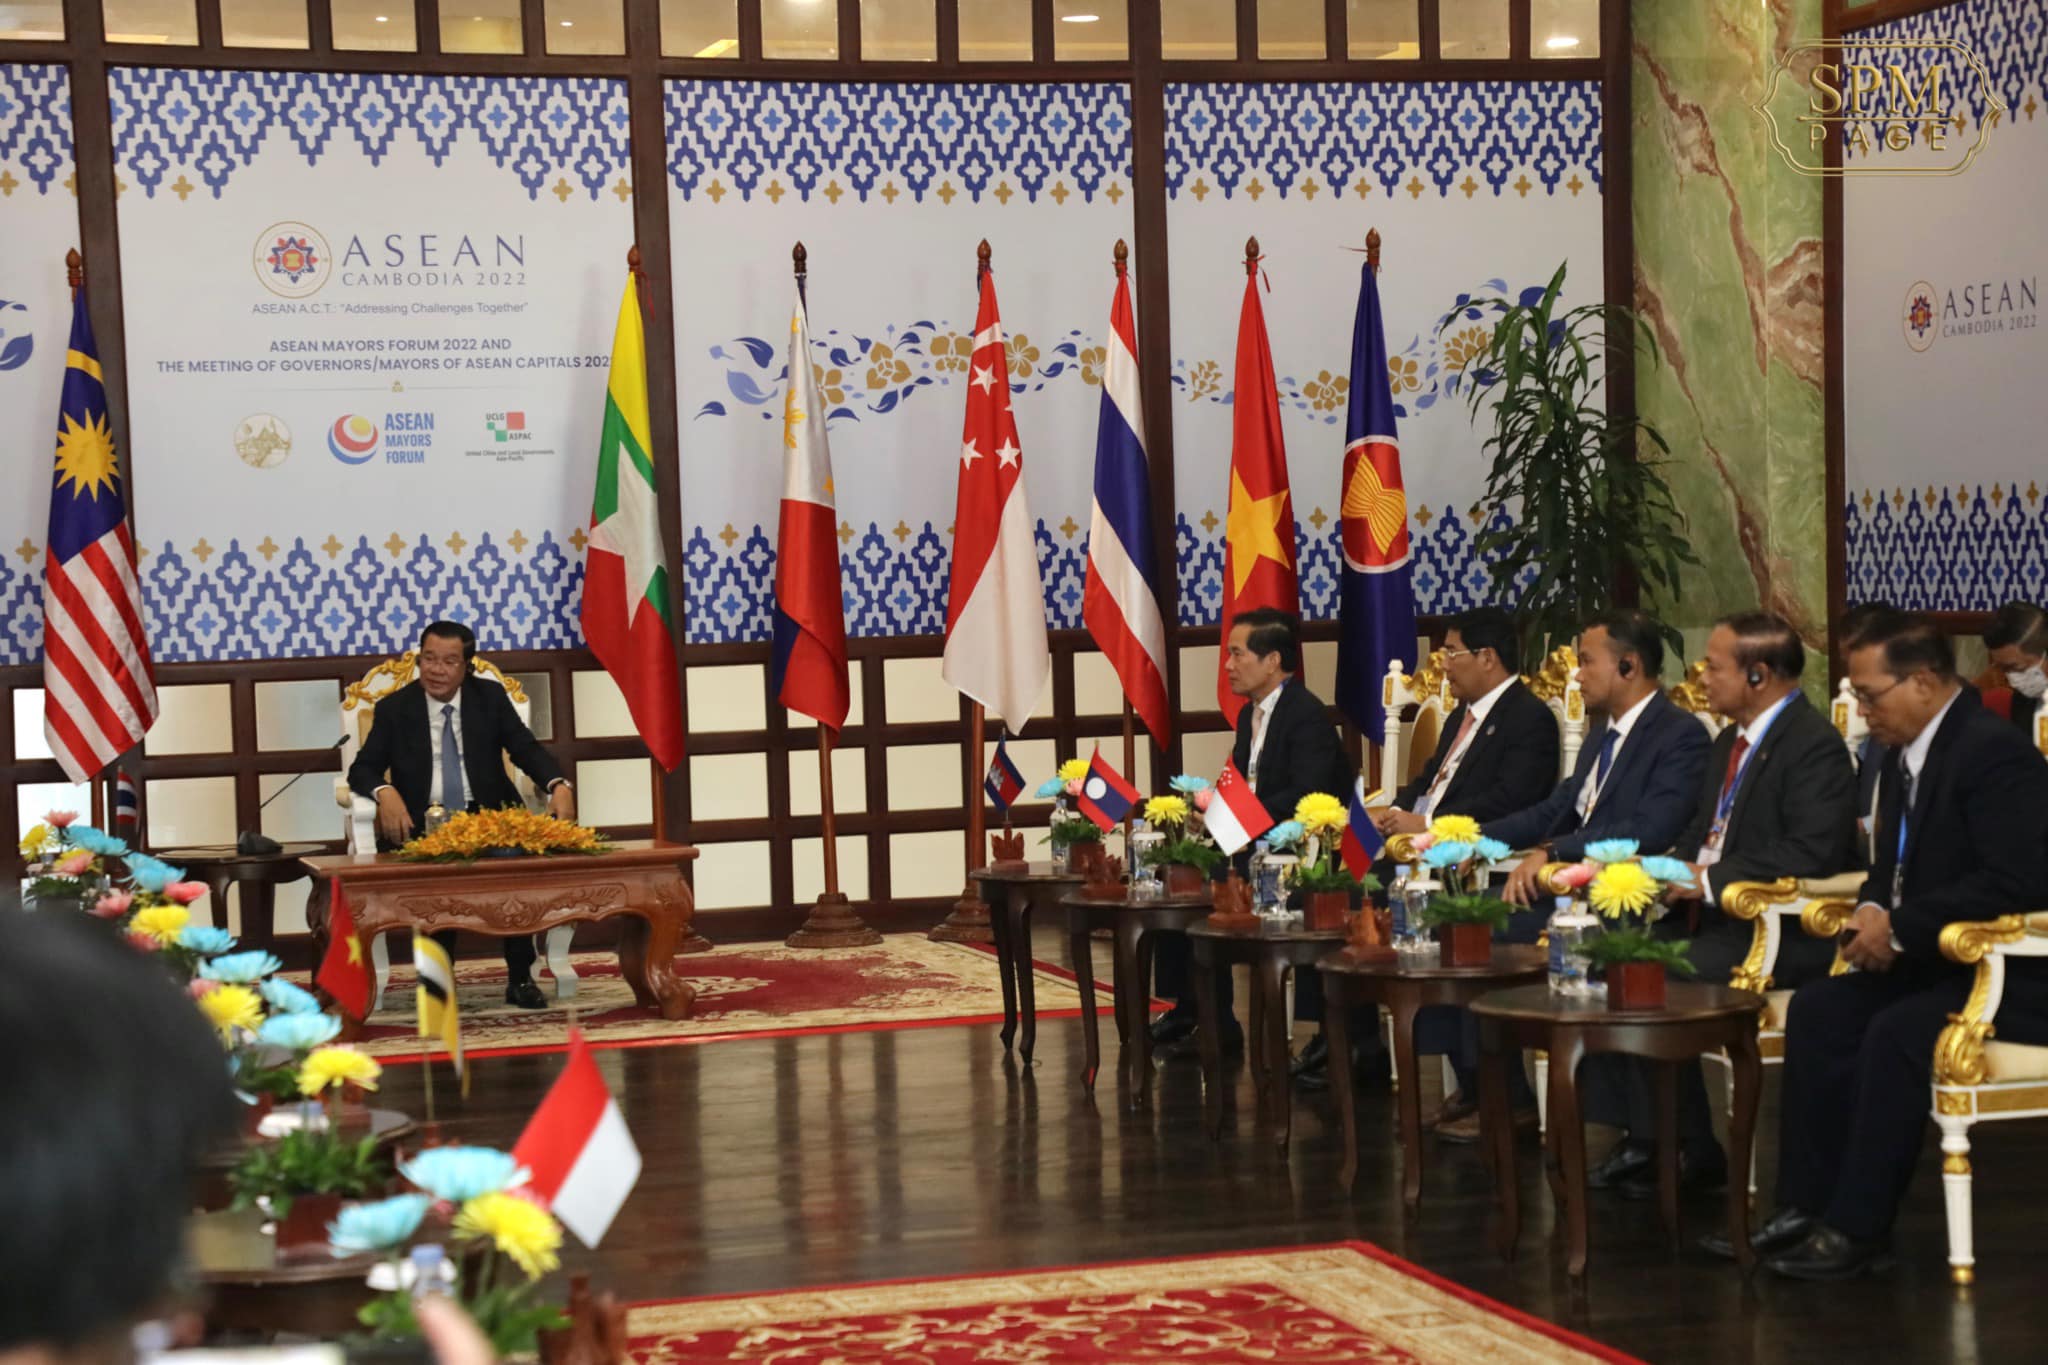 In the morning of December 2, 2022, Samdech Techo Hun Sen holds a meeting with governors/mayors of ASEAN Capitals delegation led by H.E. Chadchart Sittipunt, Governor of Bangkok, at Sokha Phnom Penh Hotel & Residence.